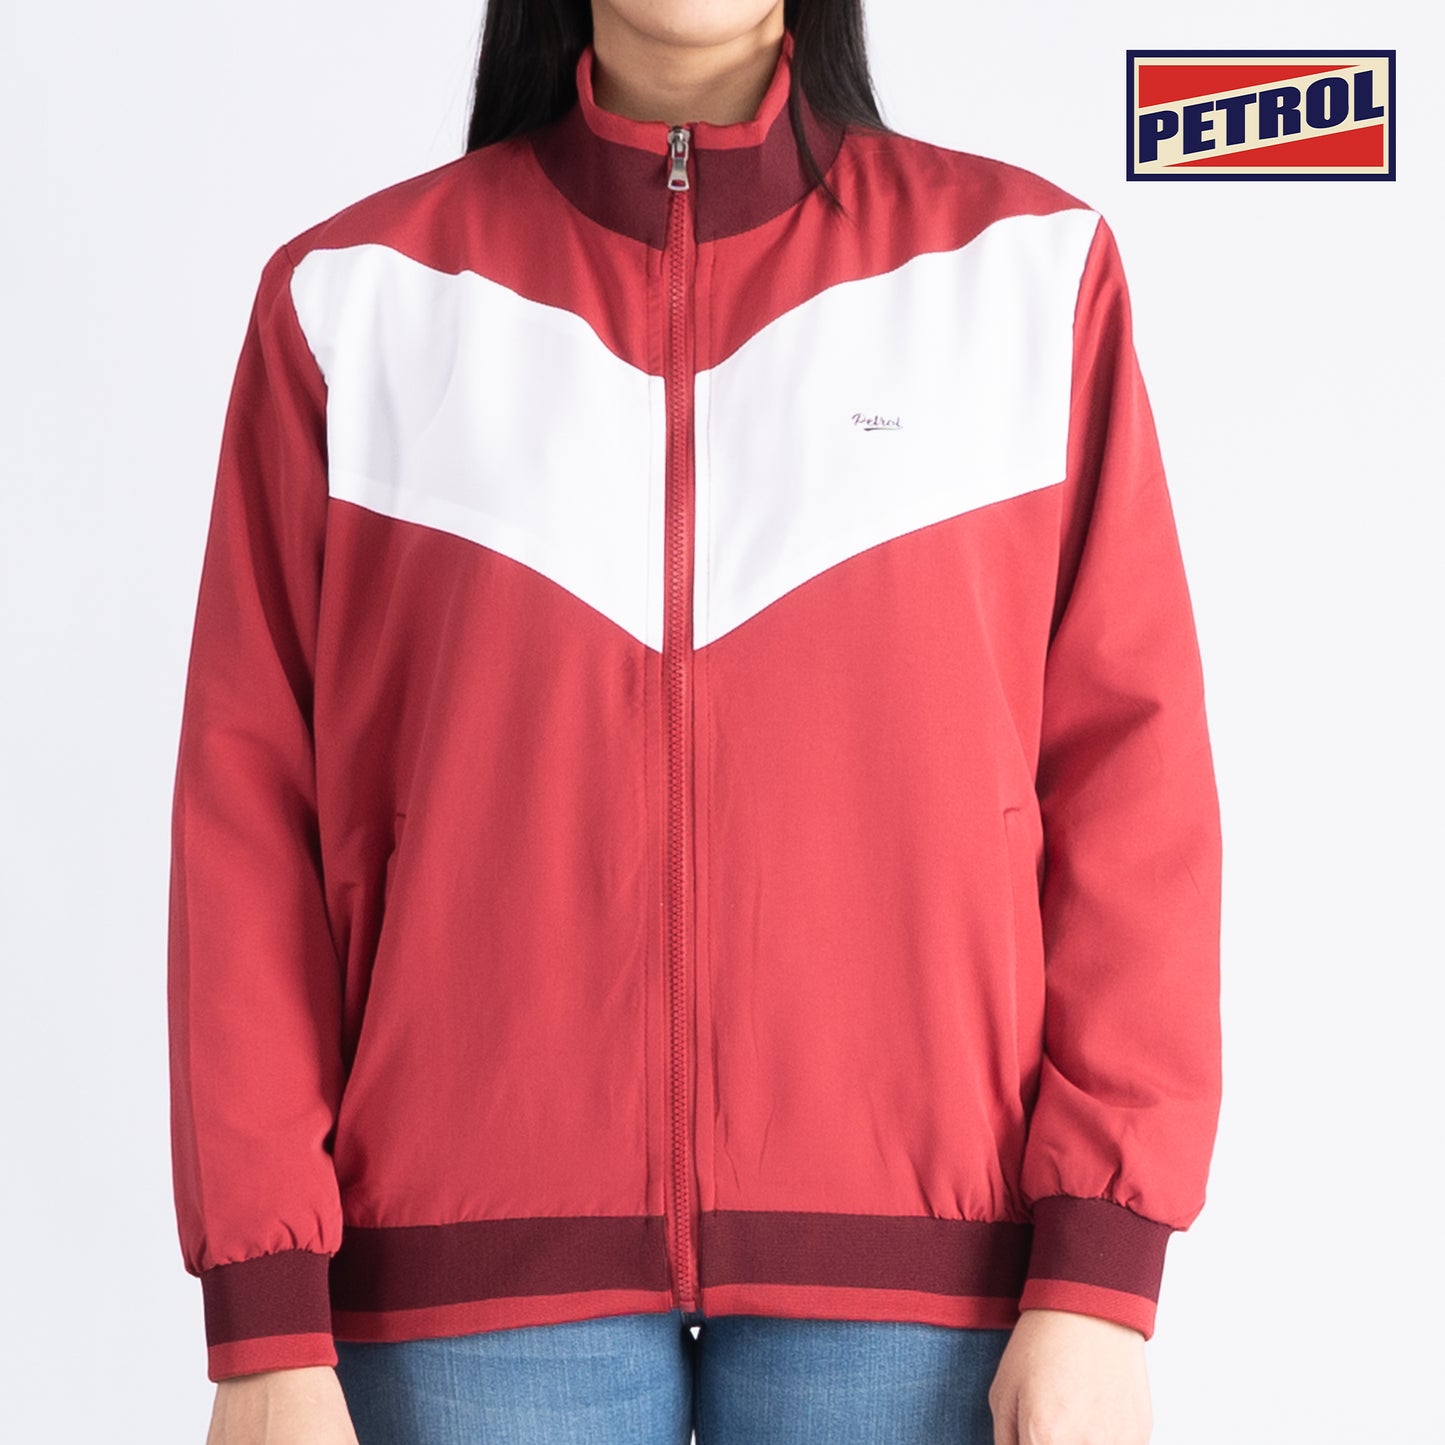 Petrol Basic Jacket for Ladies Relaxed Fitting Nylon Fabric Trendy fashion Casual Top Red Jacket for Ladies 130901 (Red)